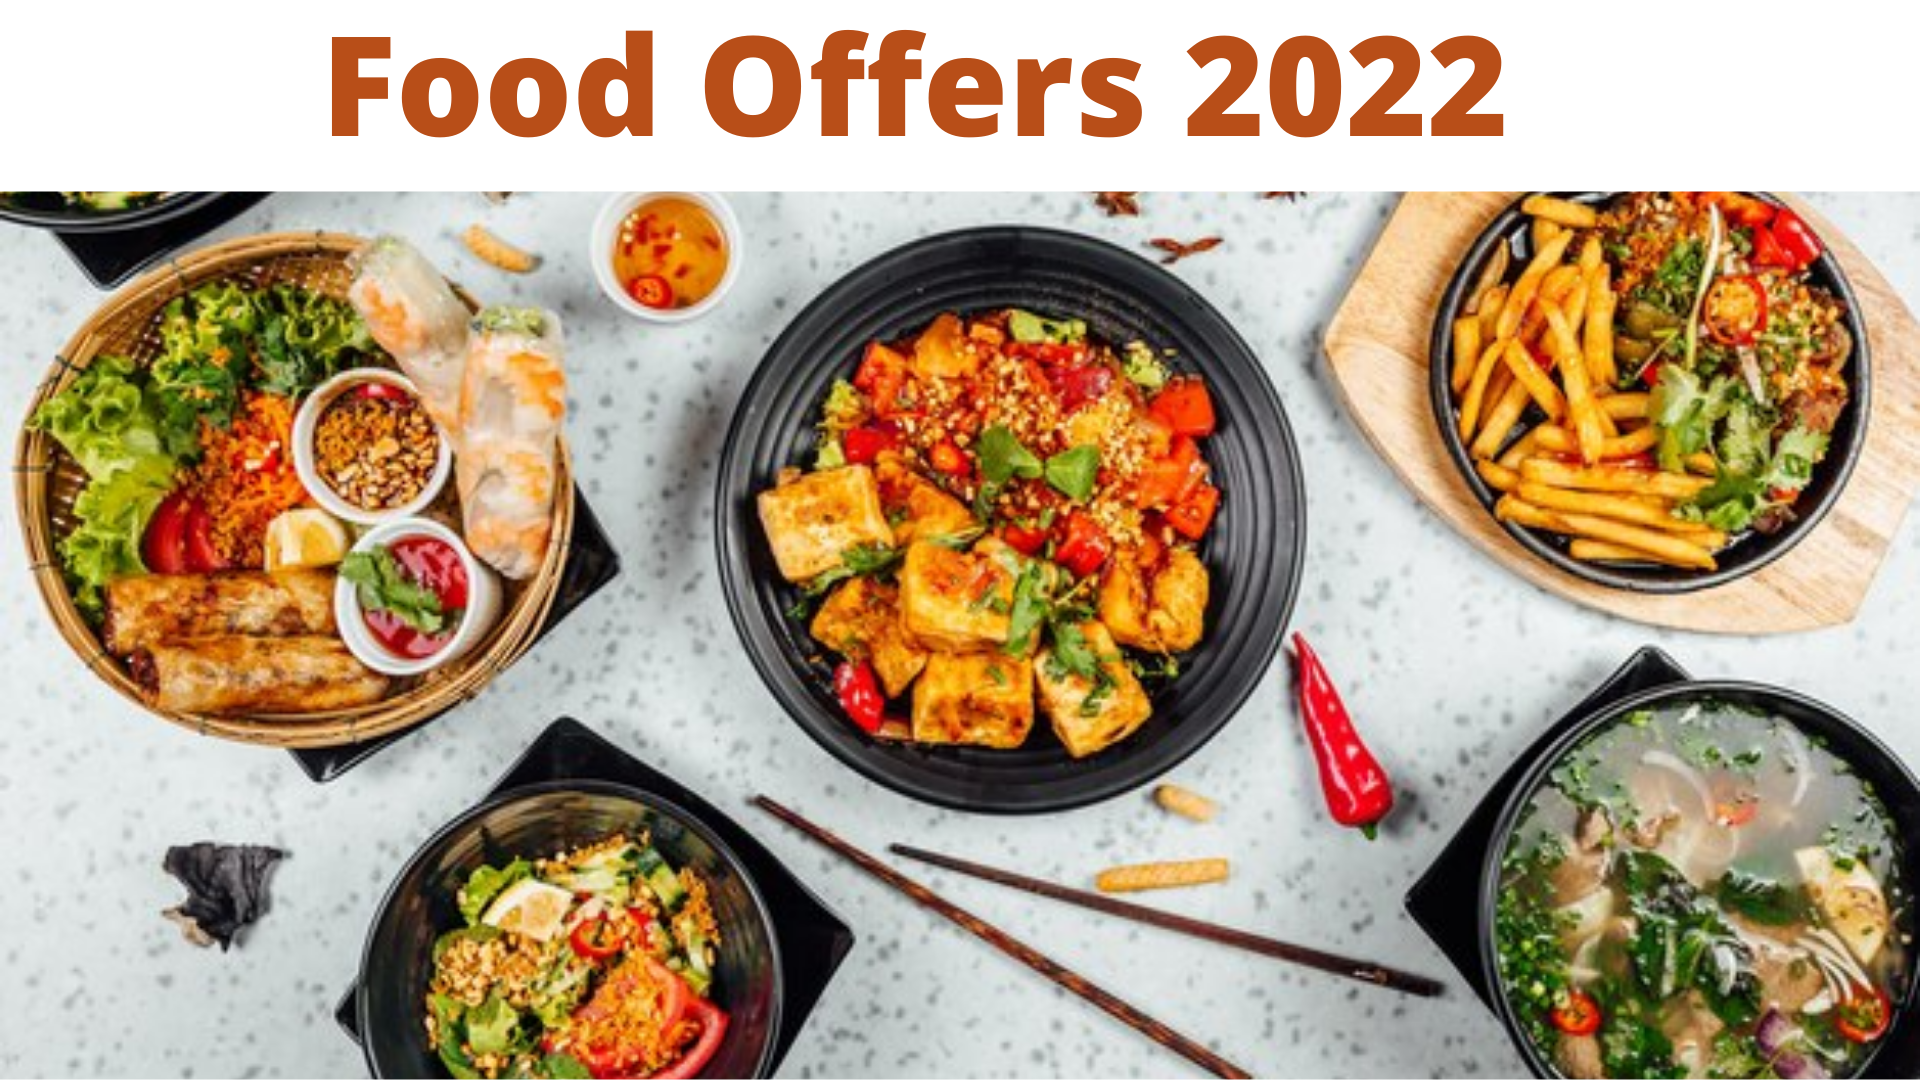 Top Food Offers 2022: Discounts on Zomato, Swiggy and More